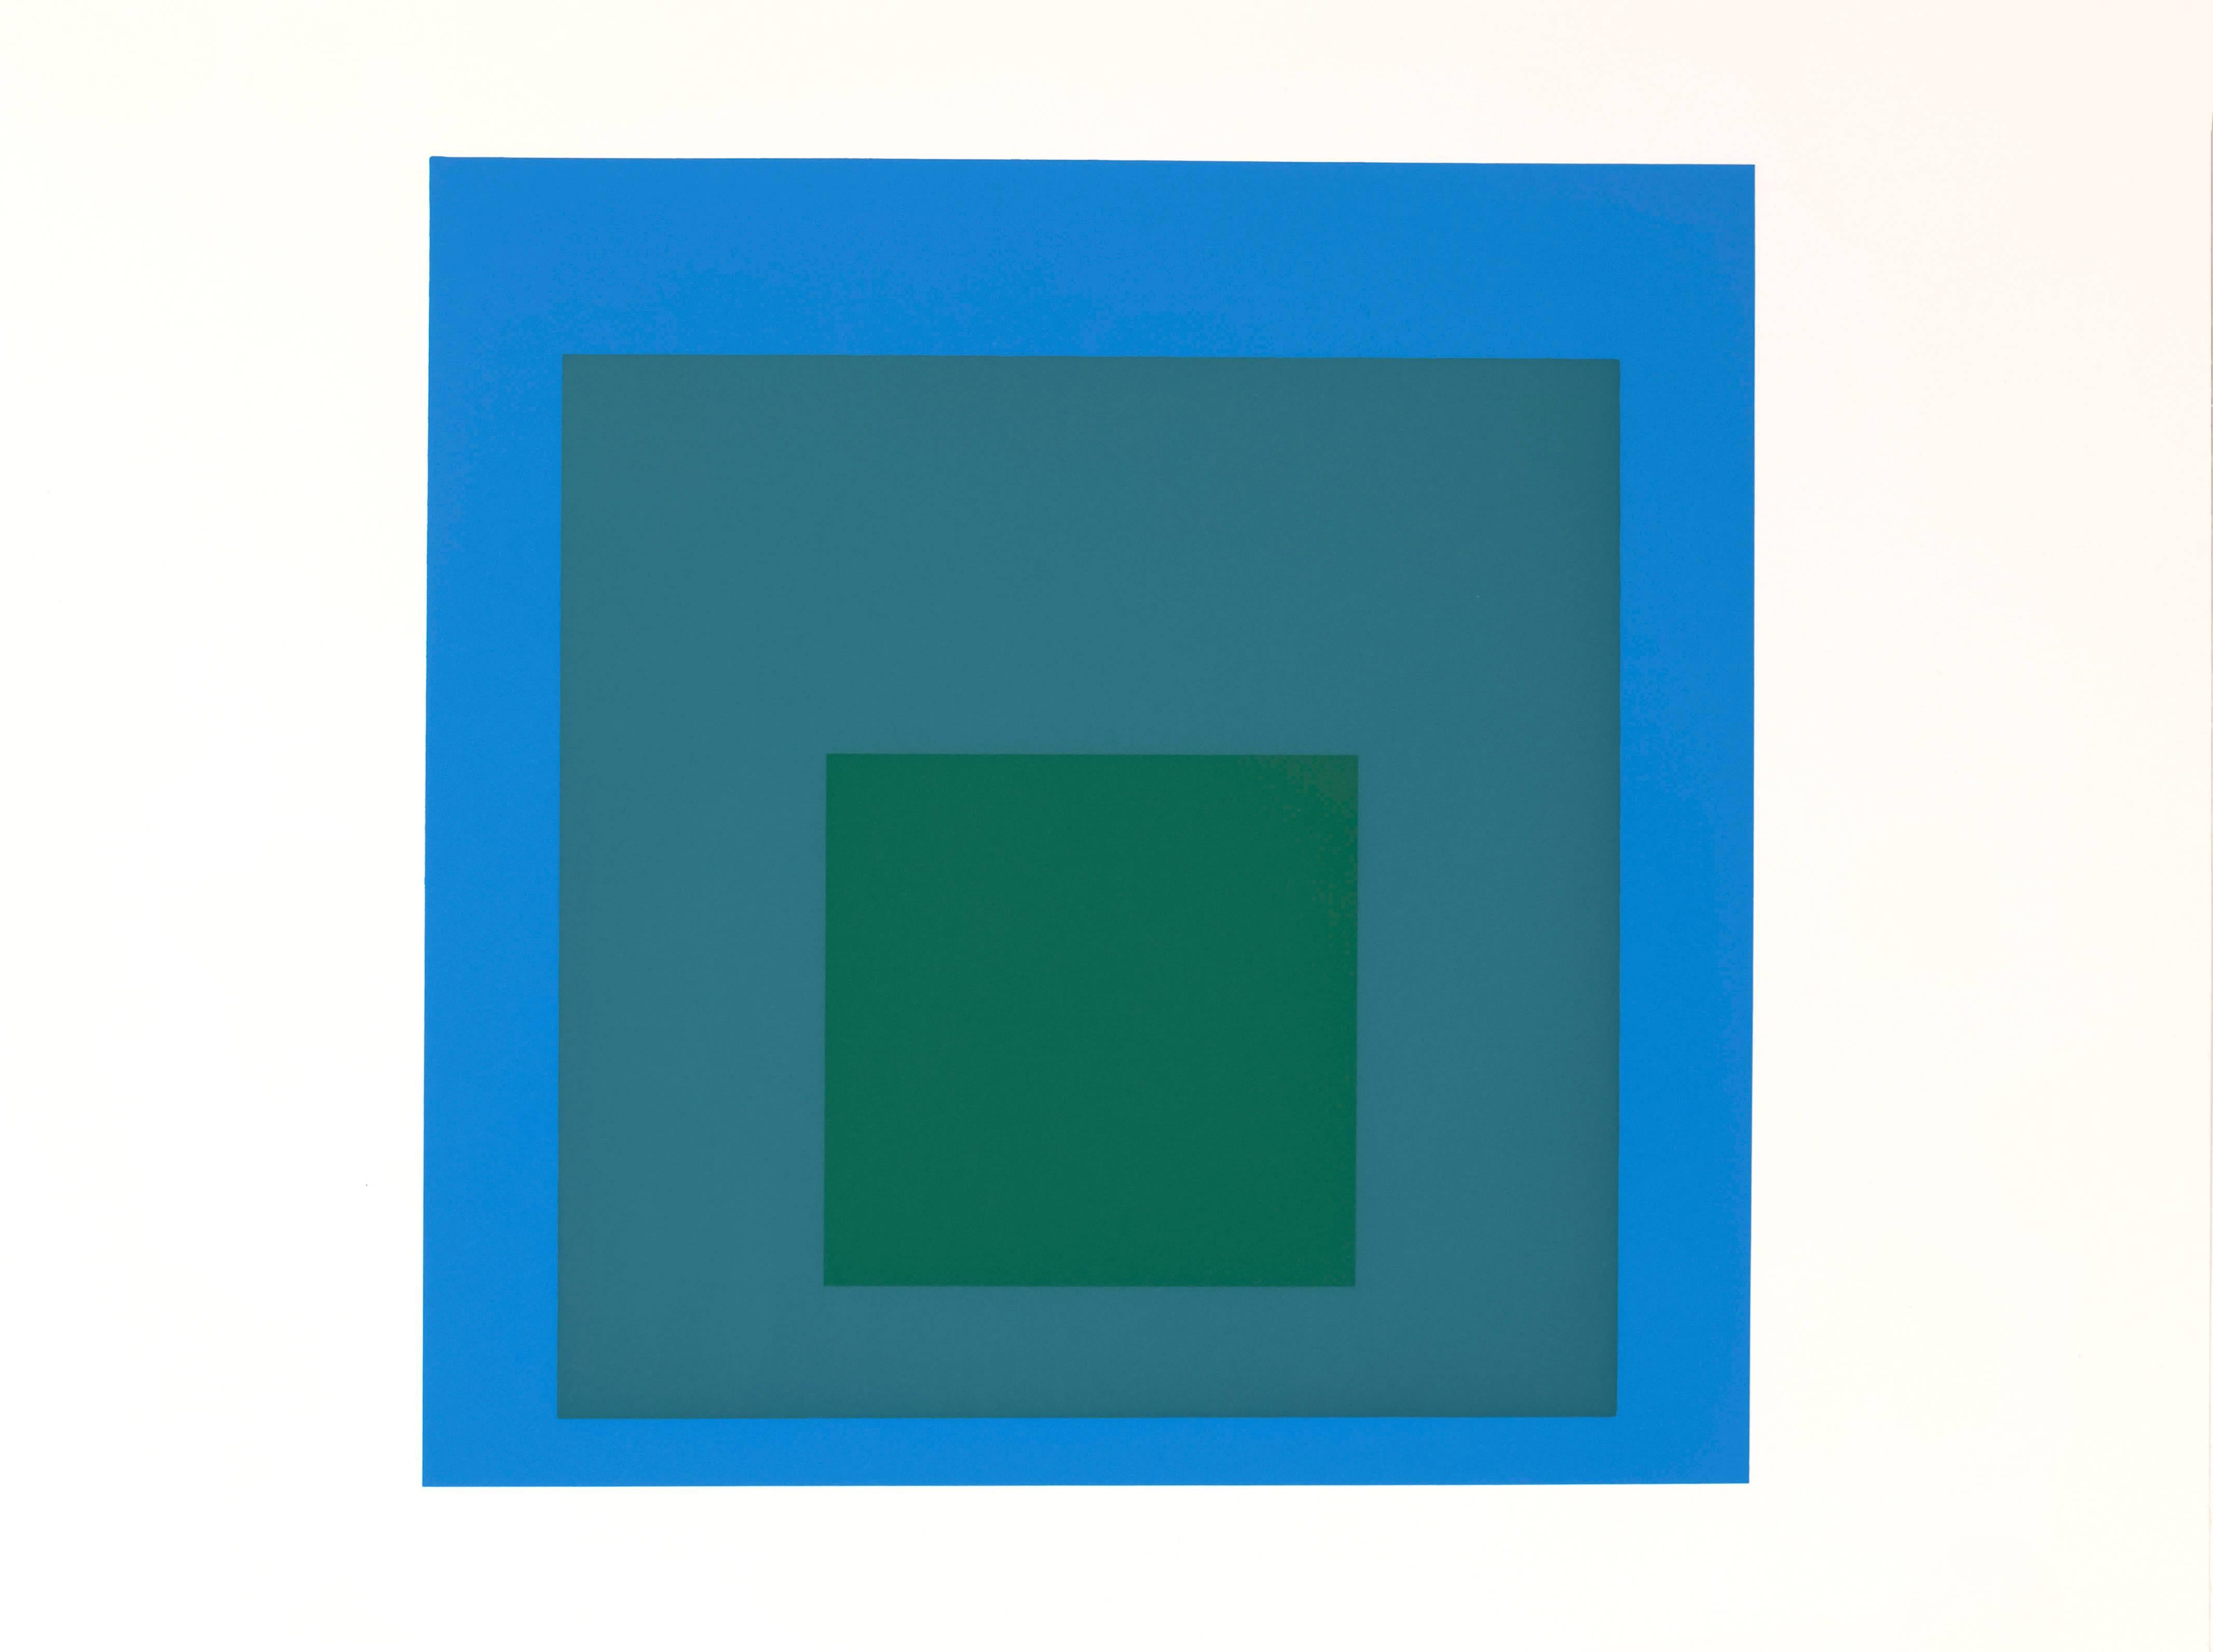 Silkscreen by Josef Albers from his classic work, &quot;Articulation : Formulation,&quot; published by Harry N. Abrams, 1972, and printed by Ives - Stillman. The individual images are unsigned. Albers' signature appears on the title page of